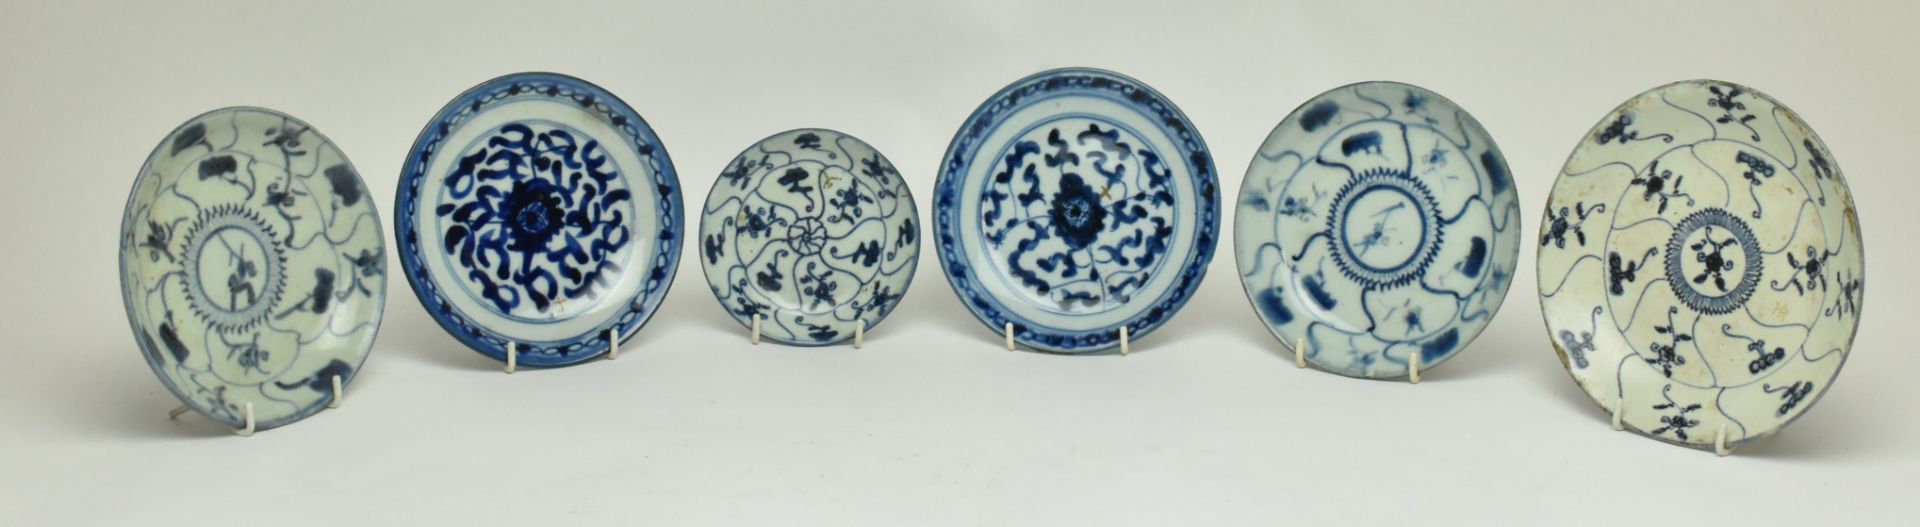 GROUP OF SIX BLUE AND WHITE EXPORT PLATES, QING DYNASTY